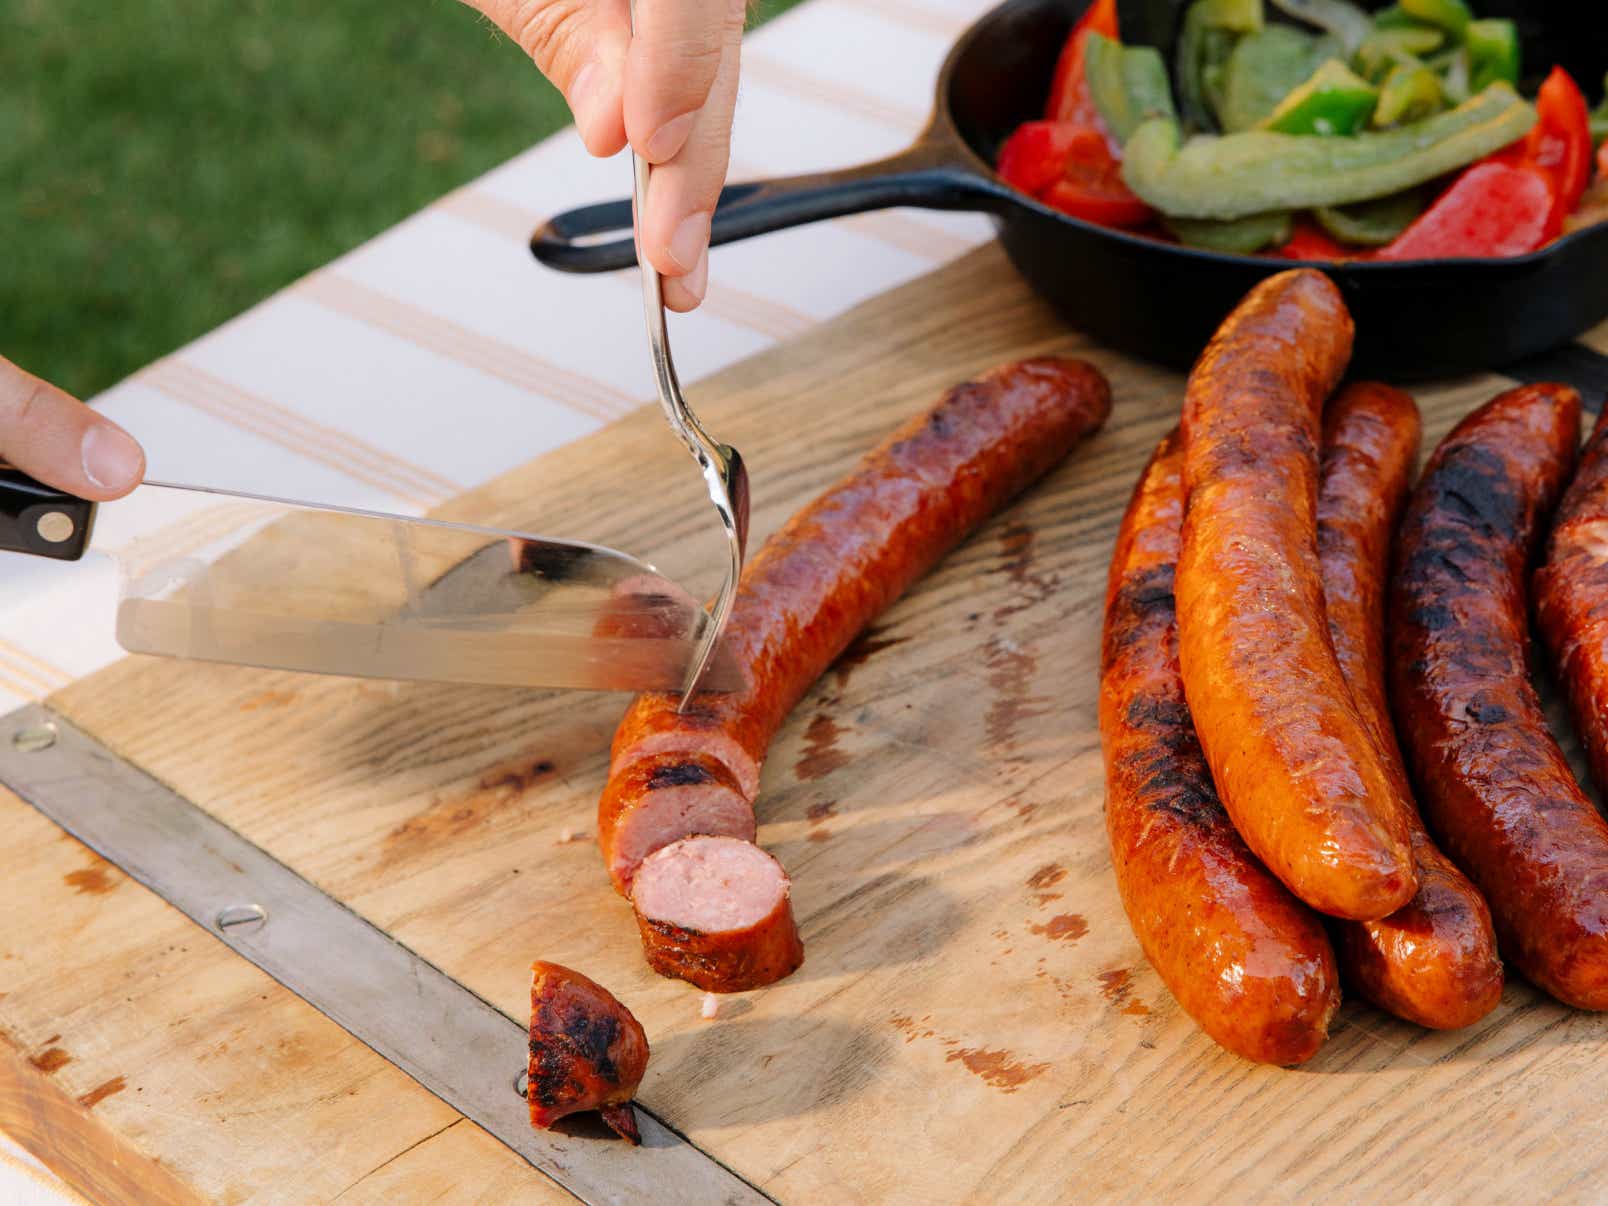 https://www.kingsford.com/wp-content/uploads/2019/05/cajun-style-smoked-sausage.jpg?quality=50